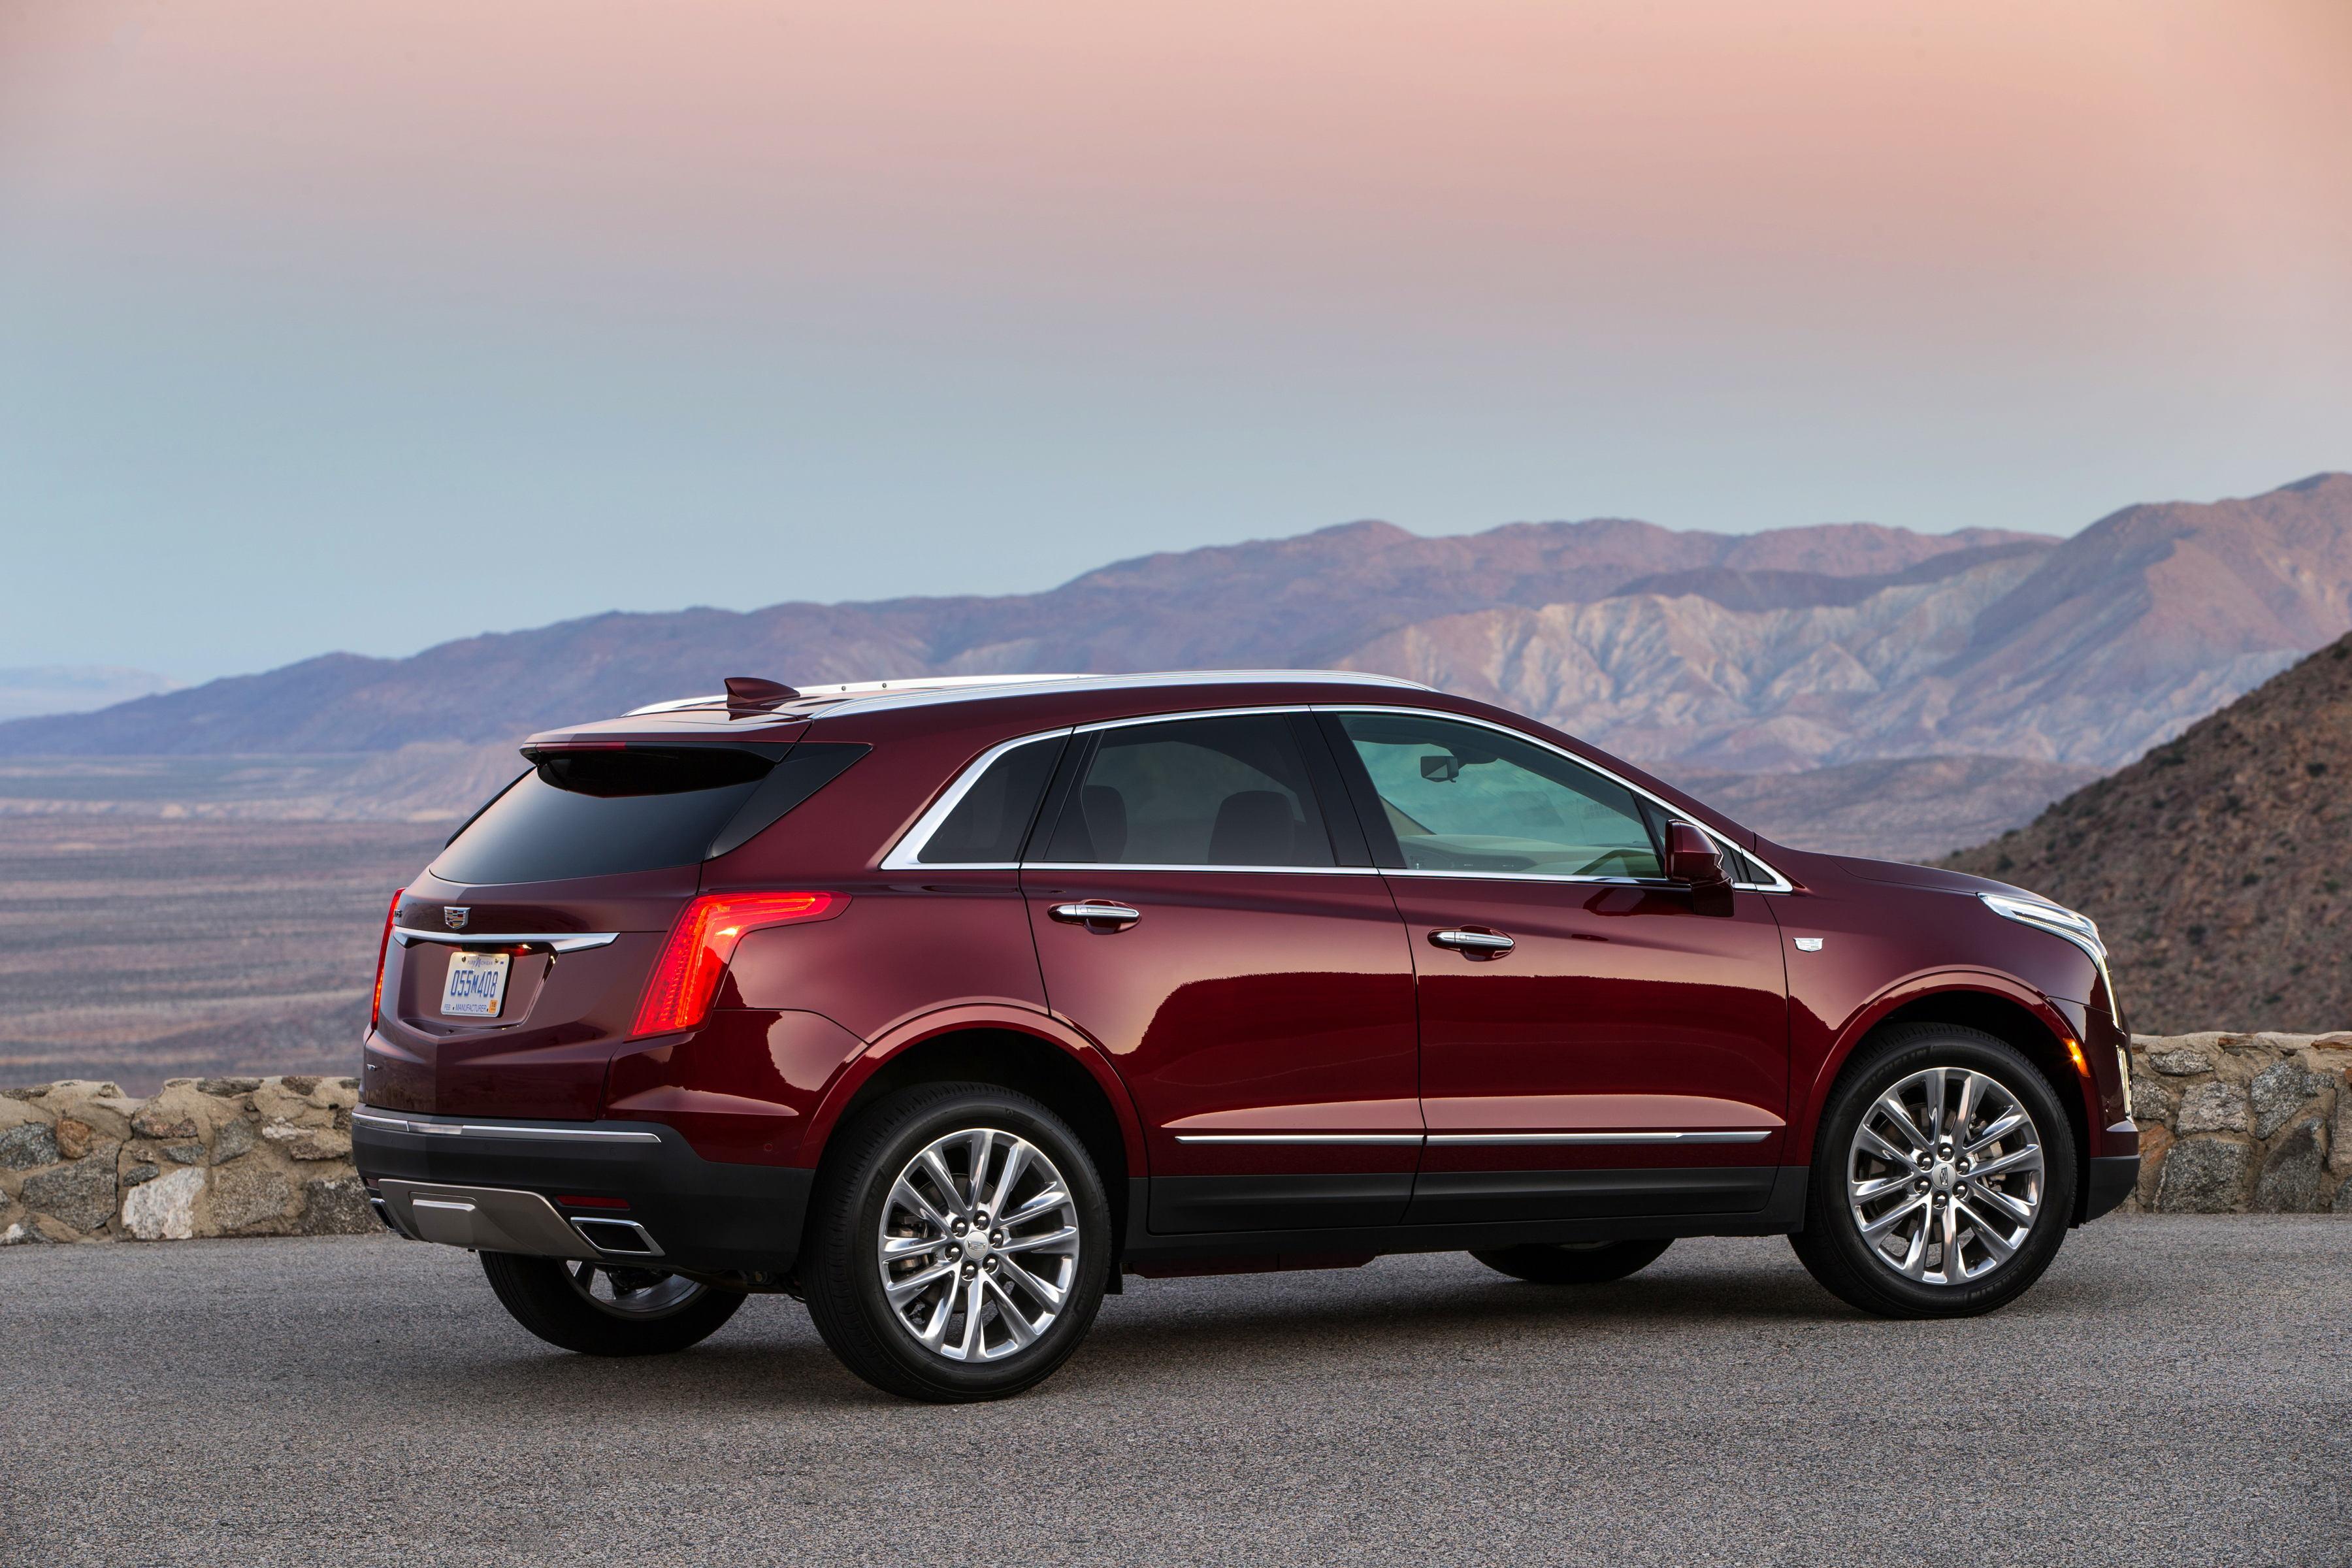 Image of a red XT5 courtesy of Cadillac.